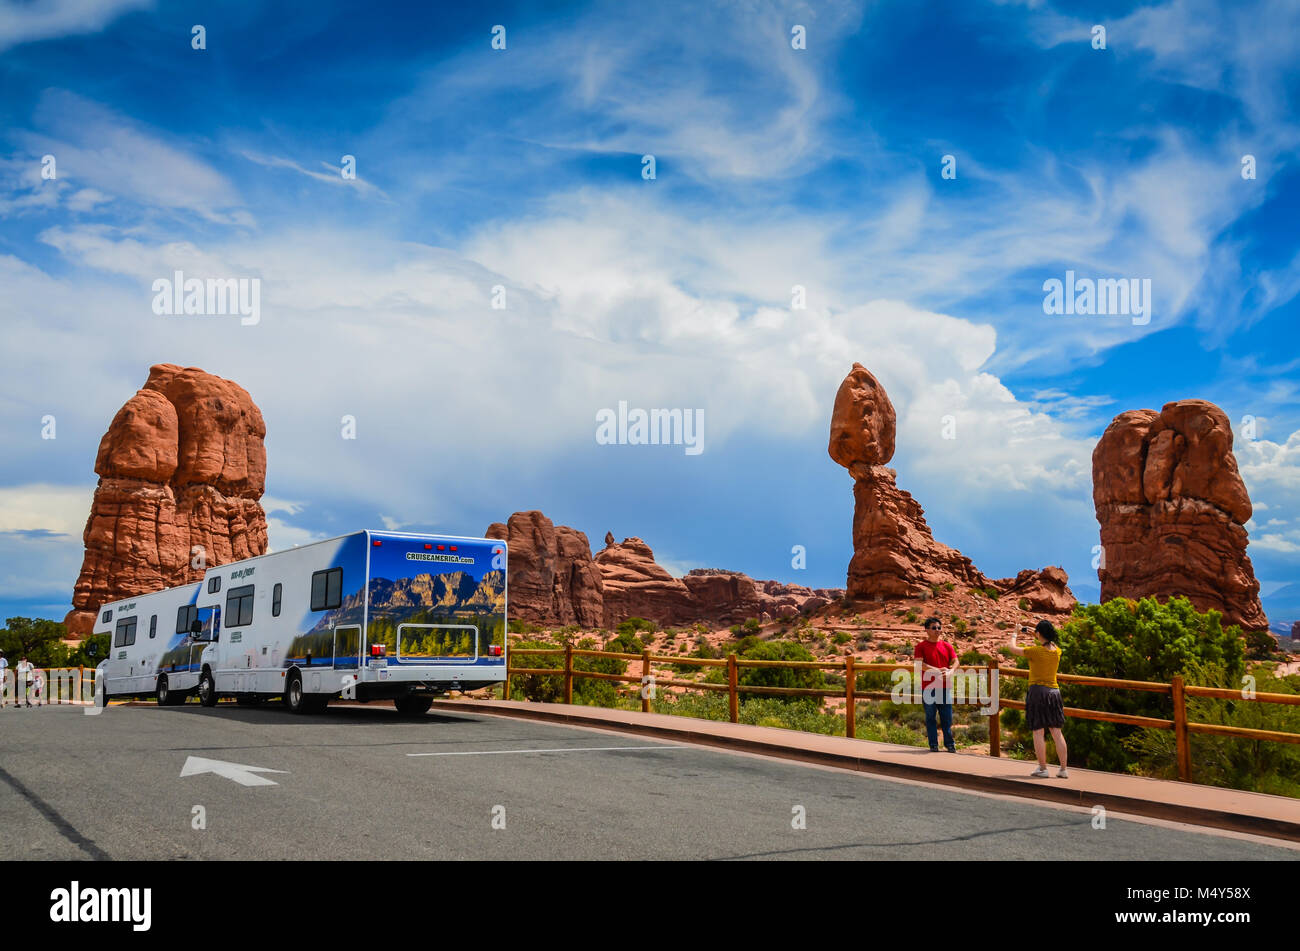 Asian tourists snapping photographs in front of Balanced Rock, while two RVs remain parked by the natural wonder. Great Basin National Park, Moab, UT Stock Photo